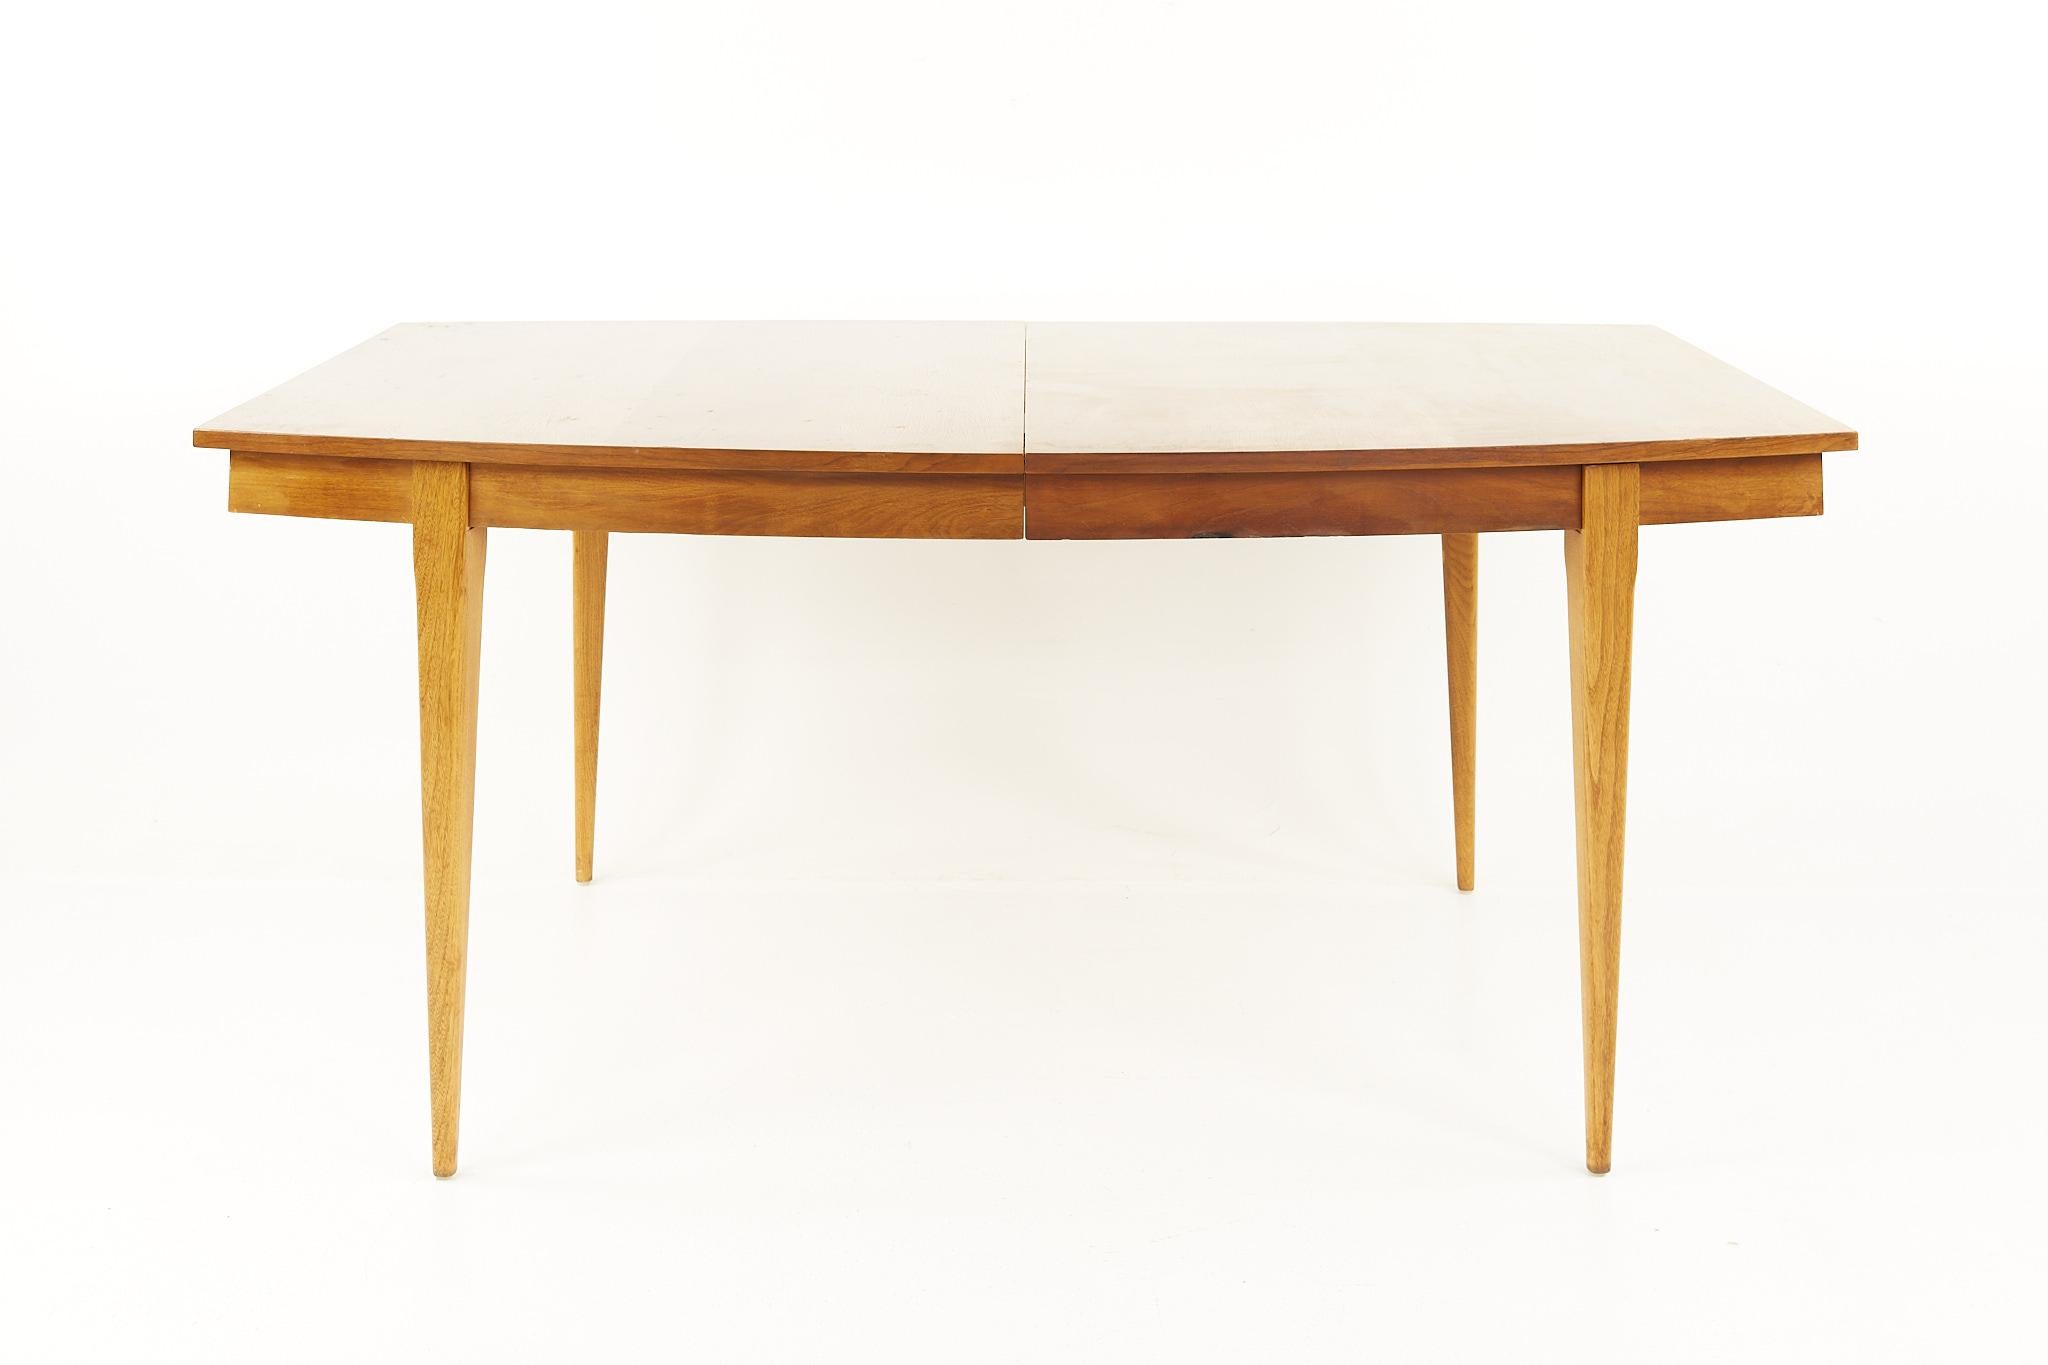 Young manufacturing mid century walnut dining table with 2 leaves

The table measures: 66 wide x 34 deep x 29.25 inches high, with a chair clearance of 25.75 inches high; each of the 2 leaves are 18 inches wide, making a maximum table width of 102